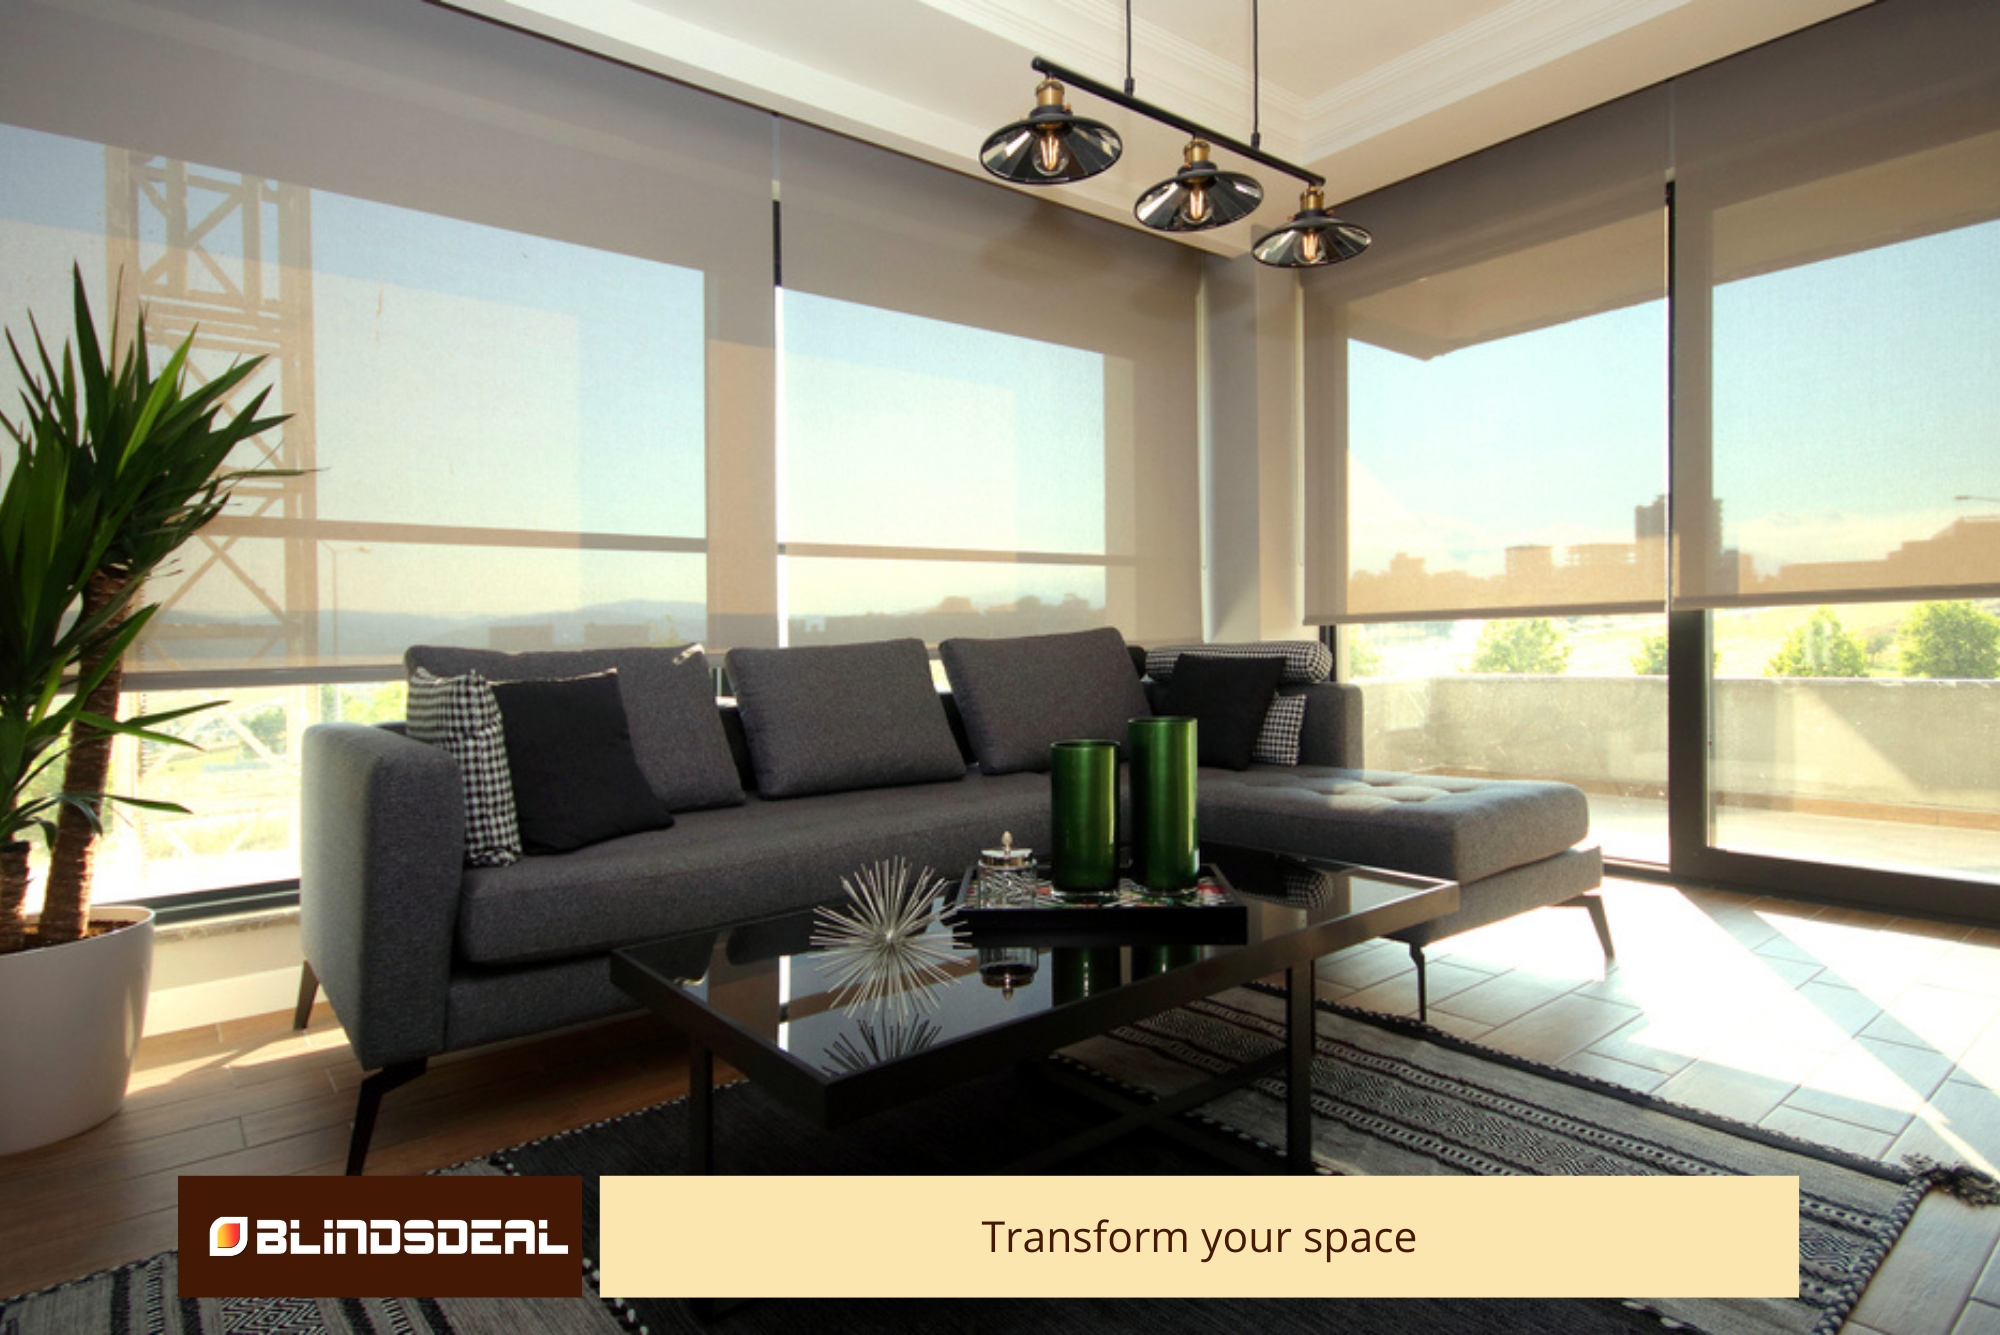 Transform your space